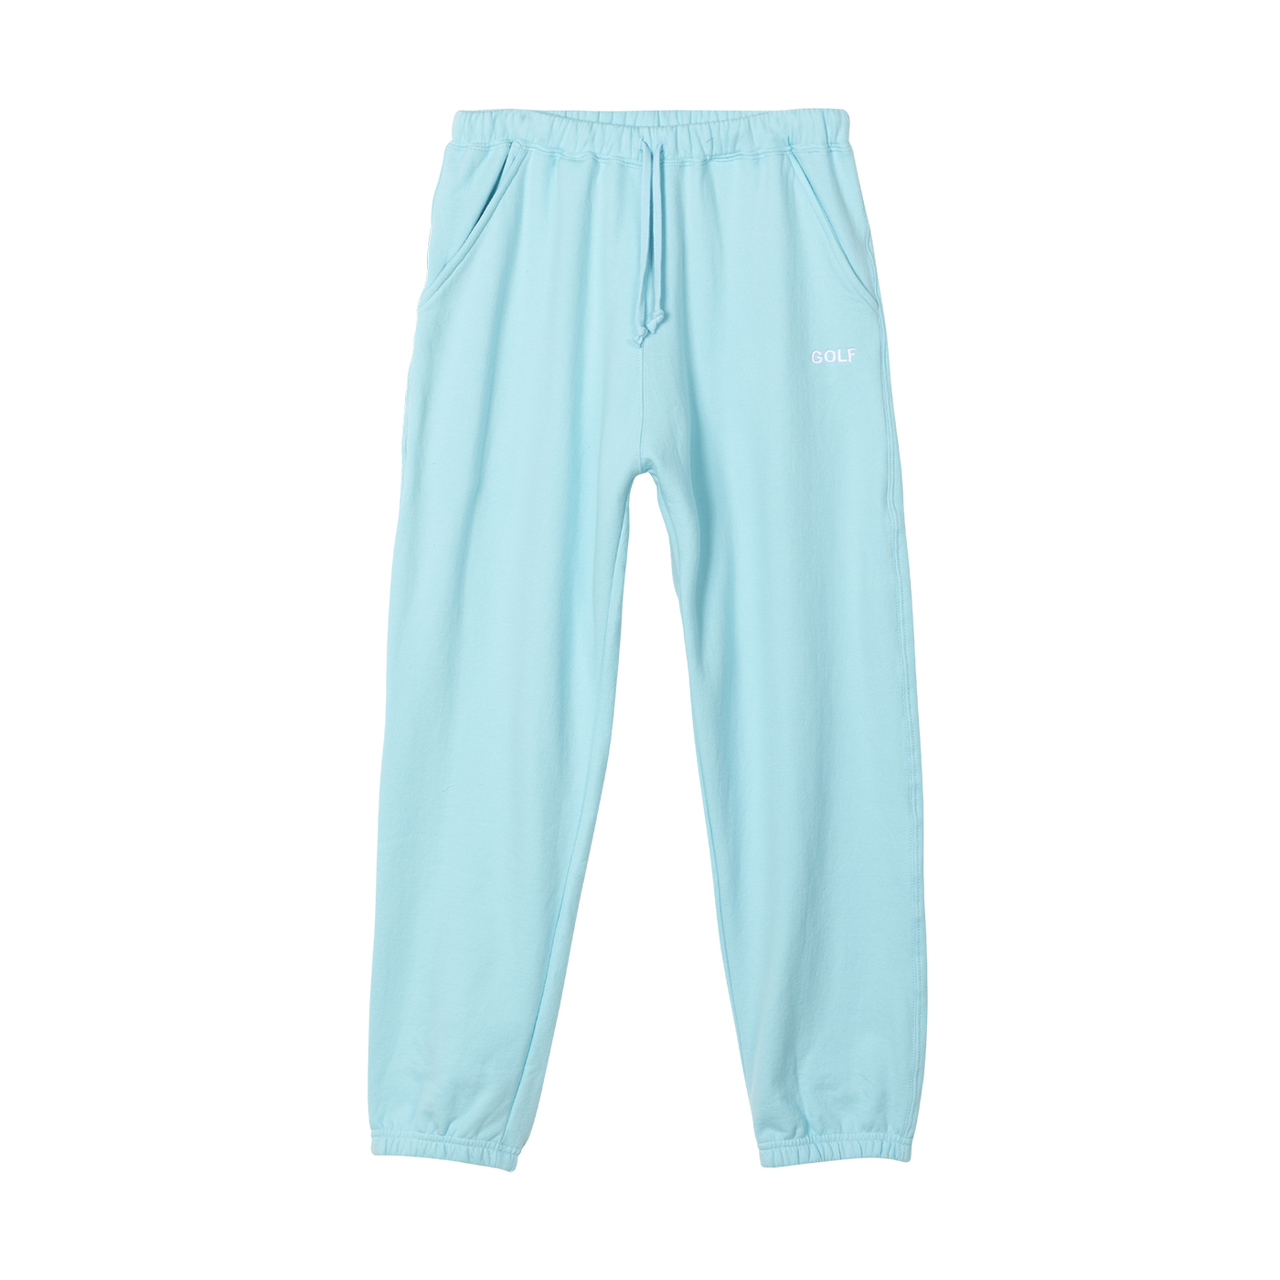 GOLF LOGO EMBROIDERED SWEATPANTS BABY BLUE